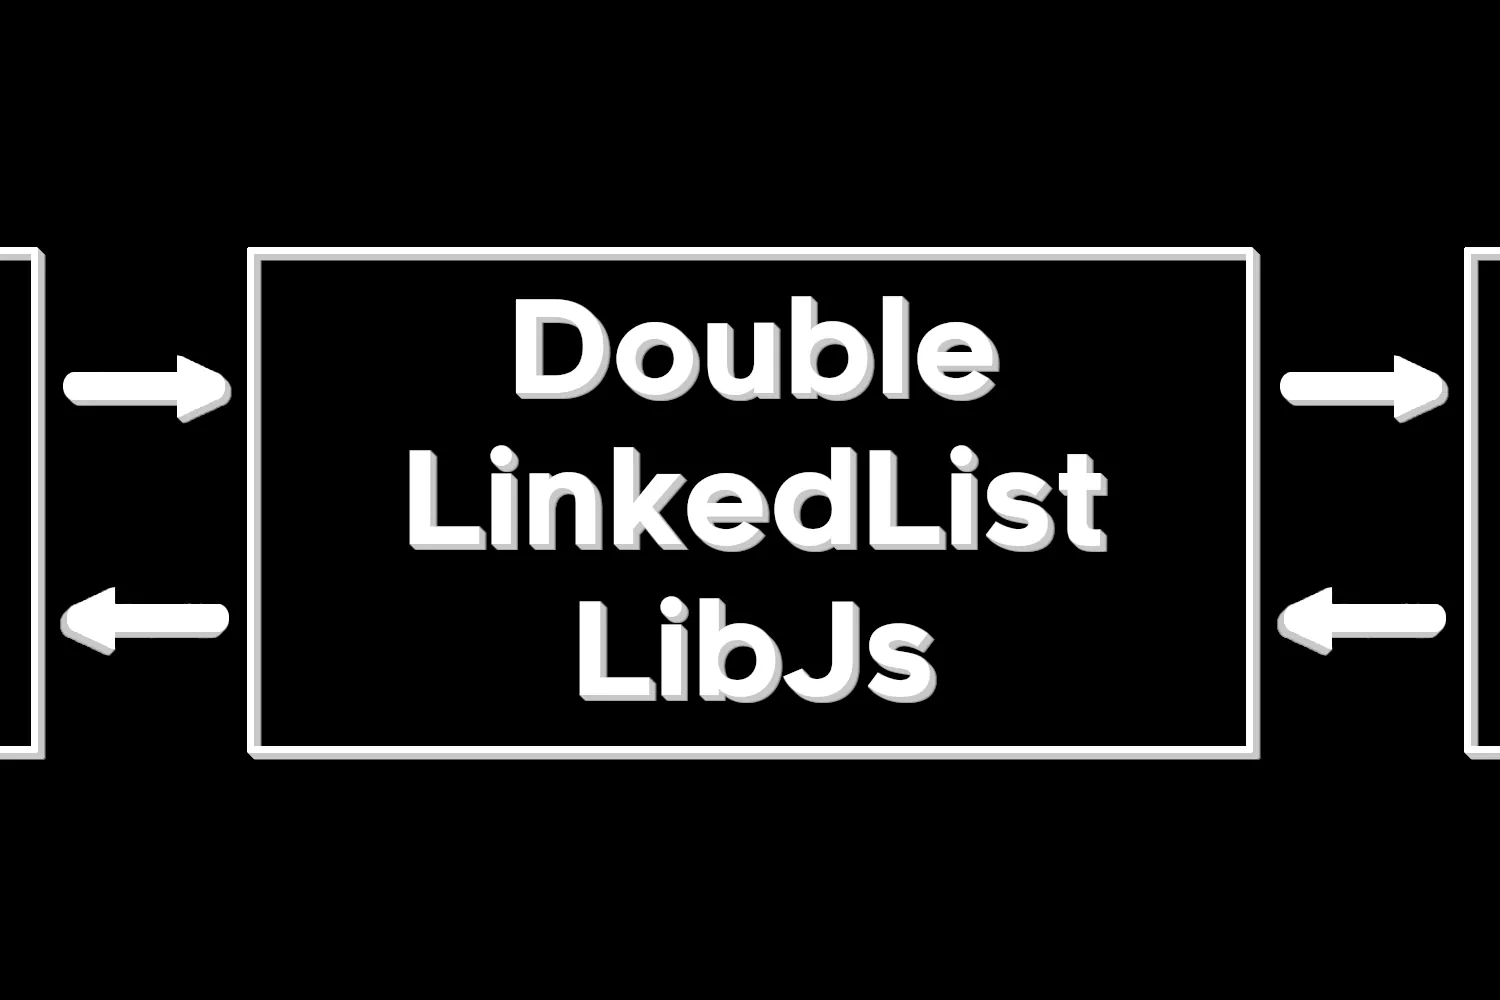 A logo displaying a double linked list with the name "DoubleLinkedListLibJs" displayed in the center of the one of the nodes